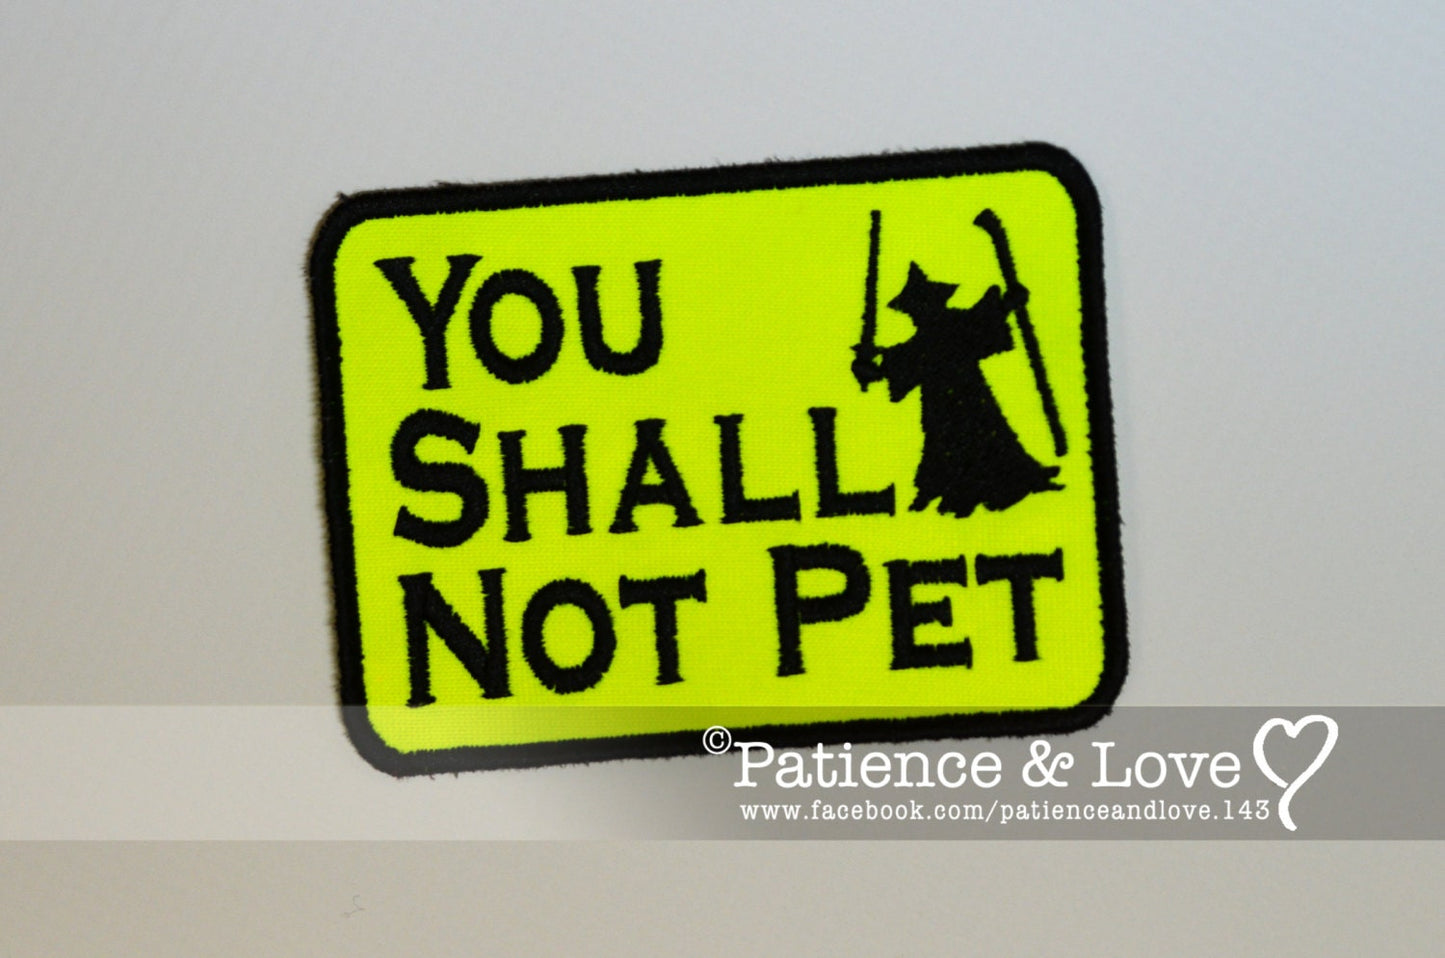 You Shall Not Pet, 3.6x2.6 inch patch